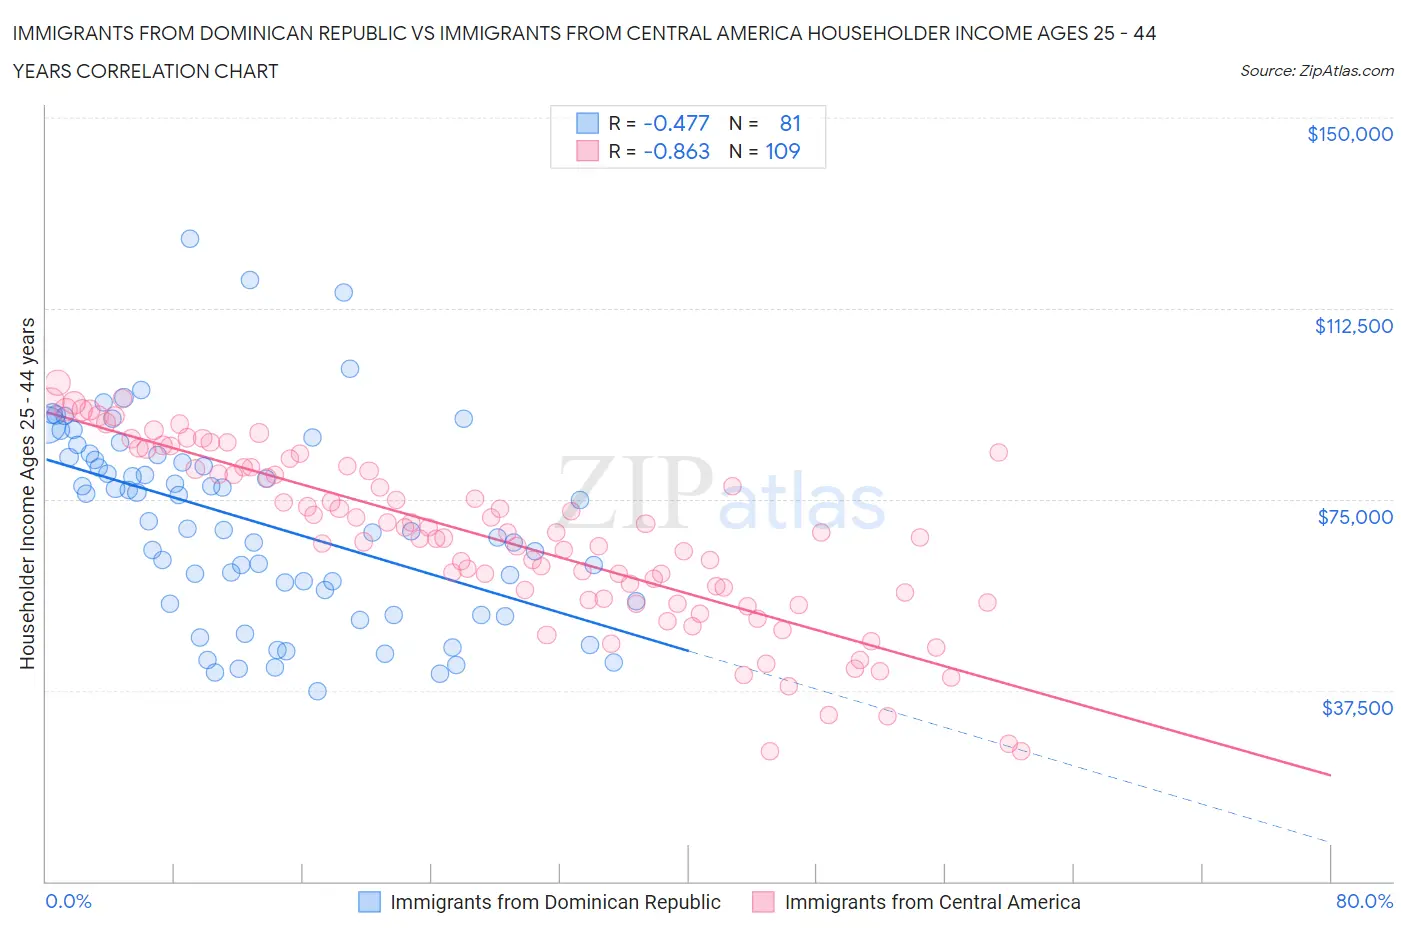 Immigrants from Dominican Republic vs Immigrants from Central America Householder Income Ages 25 - 44 years